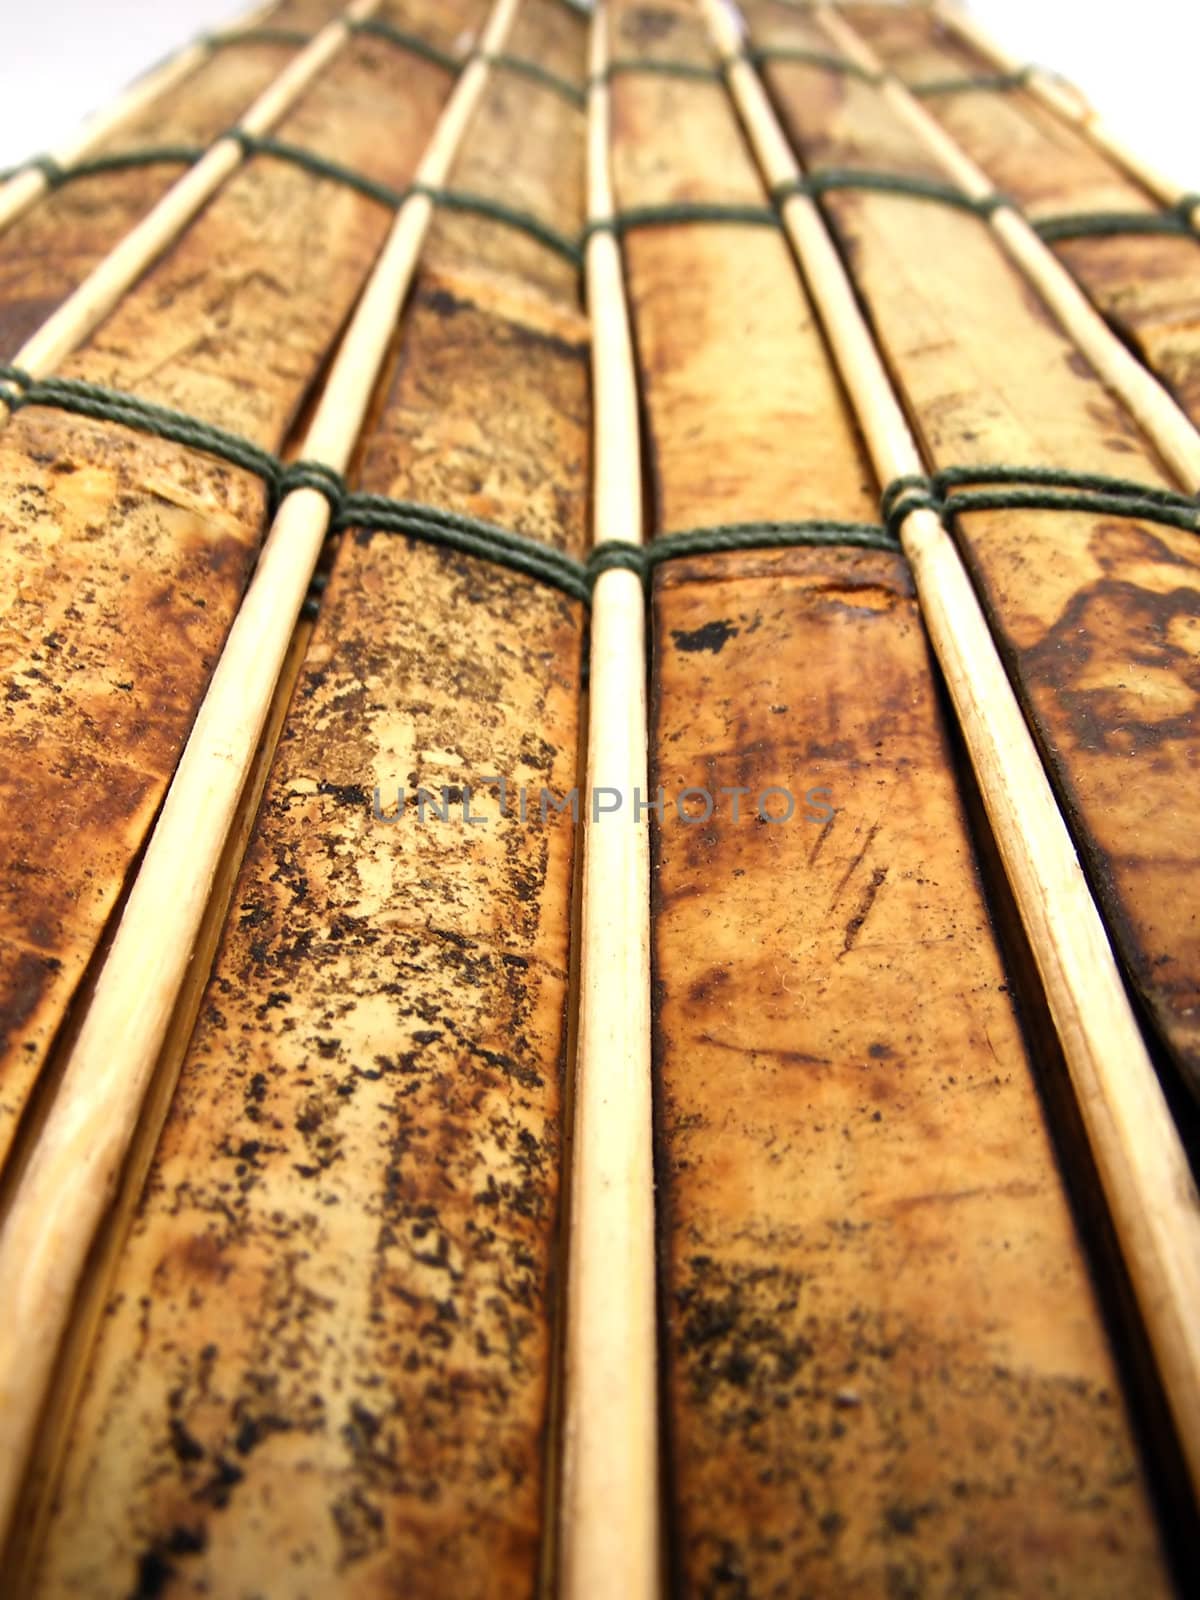 Bamboo Mat Perspective by watamyr